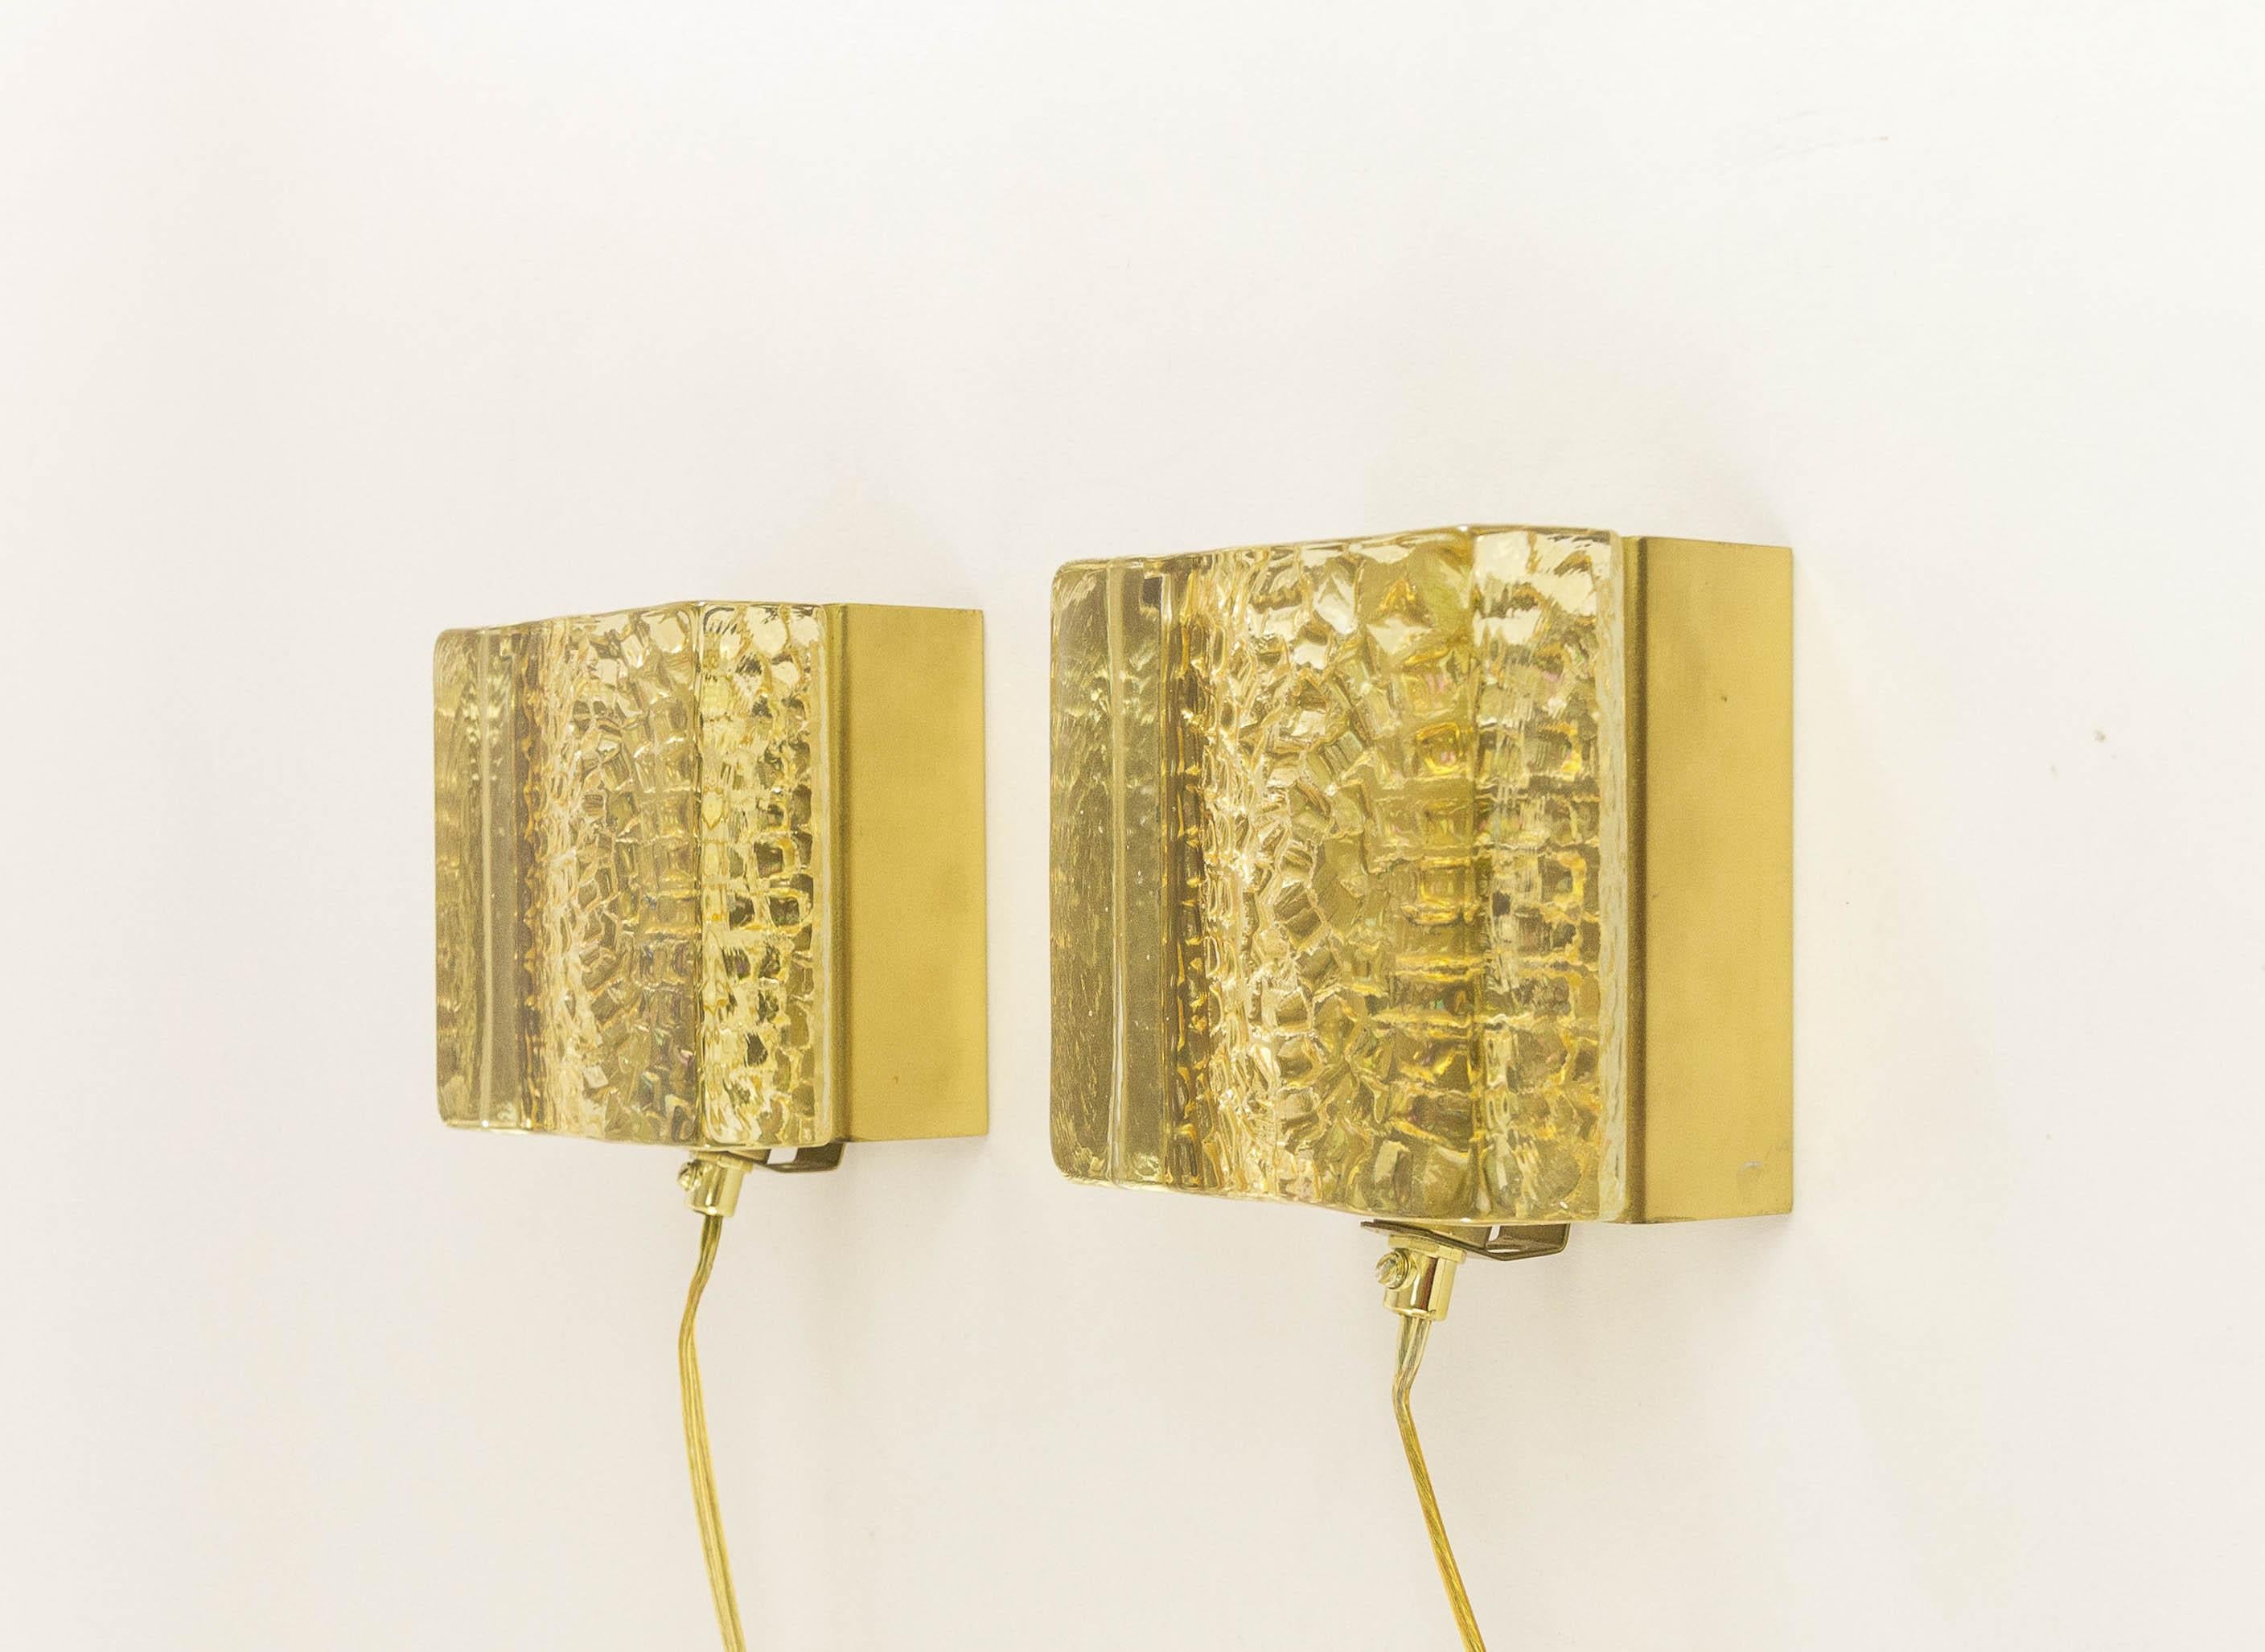 A set of two Kalmar Lampet wall lamps, produced by Danish lighting manufacturer Vitrika in the 1970s.

Both lamps consists of two parts: a solid and rather heavy (1.5 kg / 4 lb) handmade glass body in gold, and the brass holder.

Price is for the